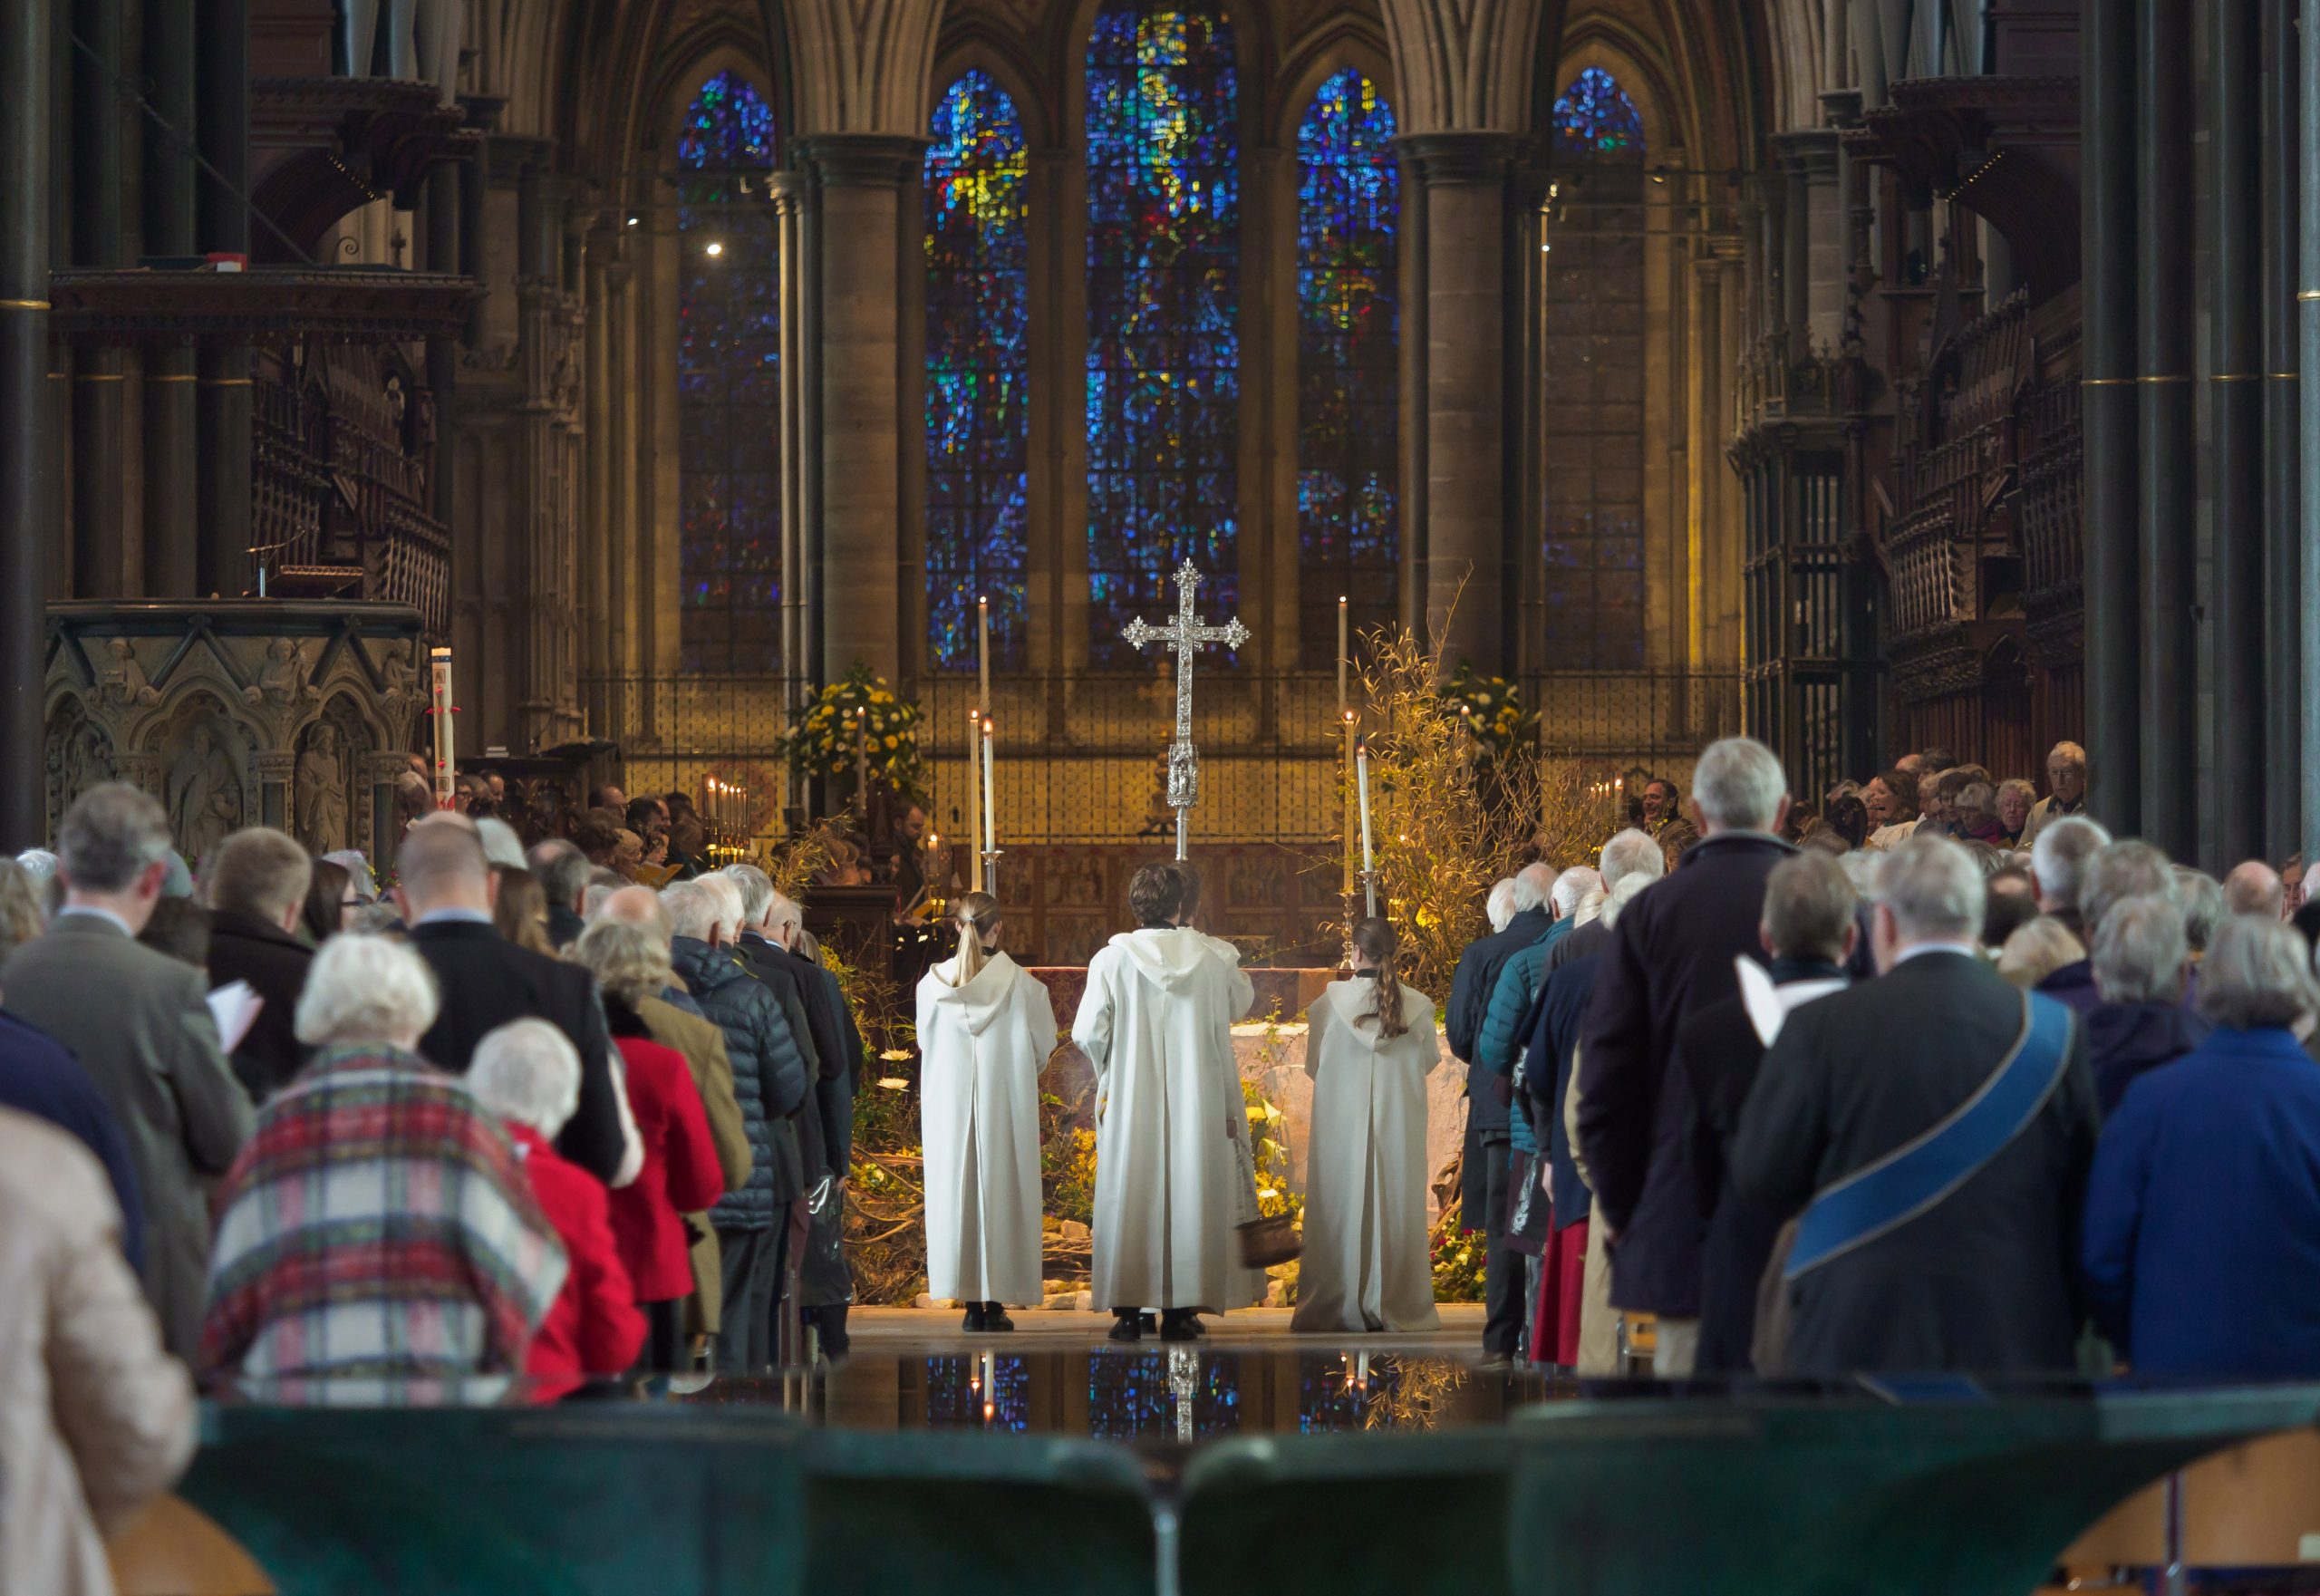 Easter Sunday Worship where music from the choir was enjoyed at Salisbury Cathedral